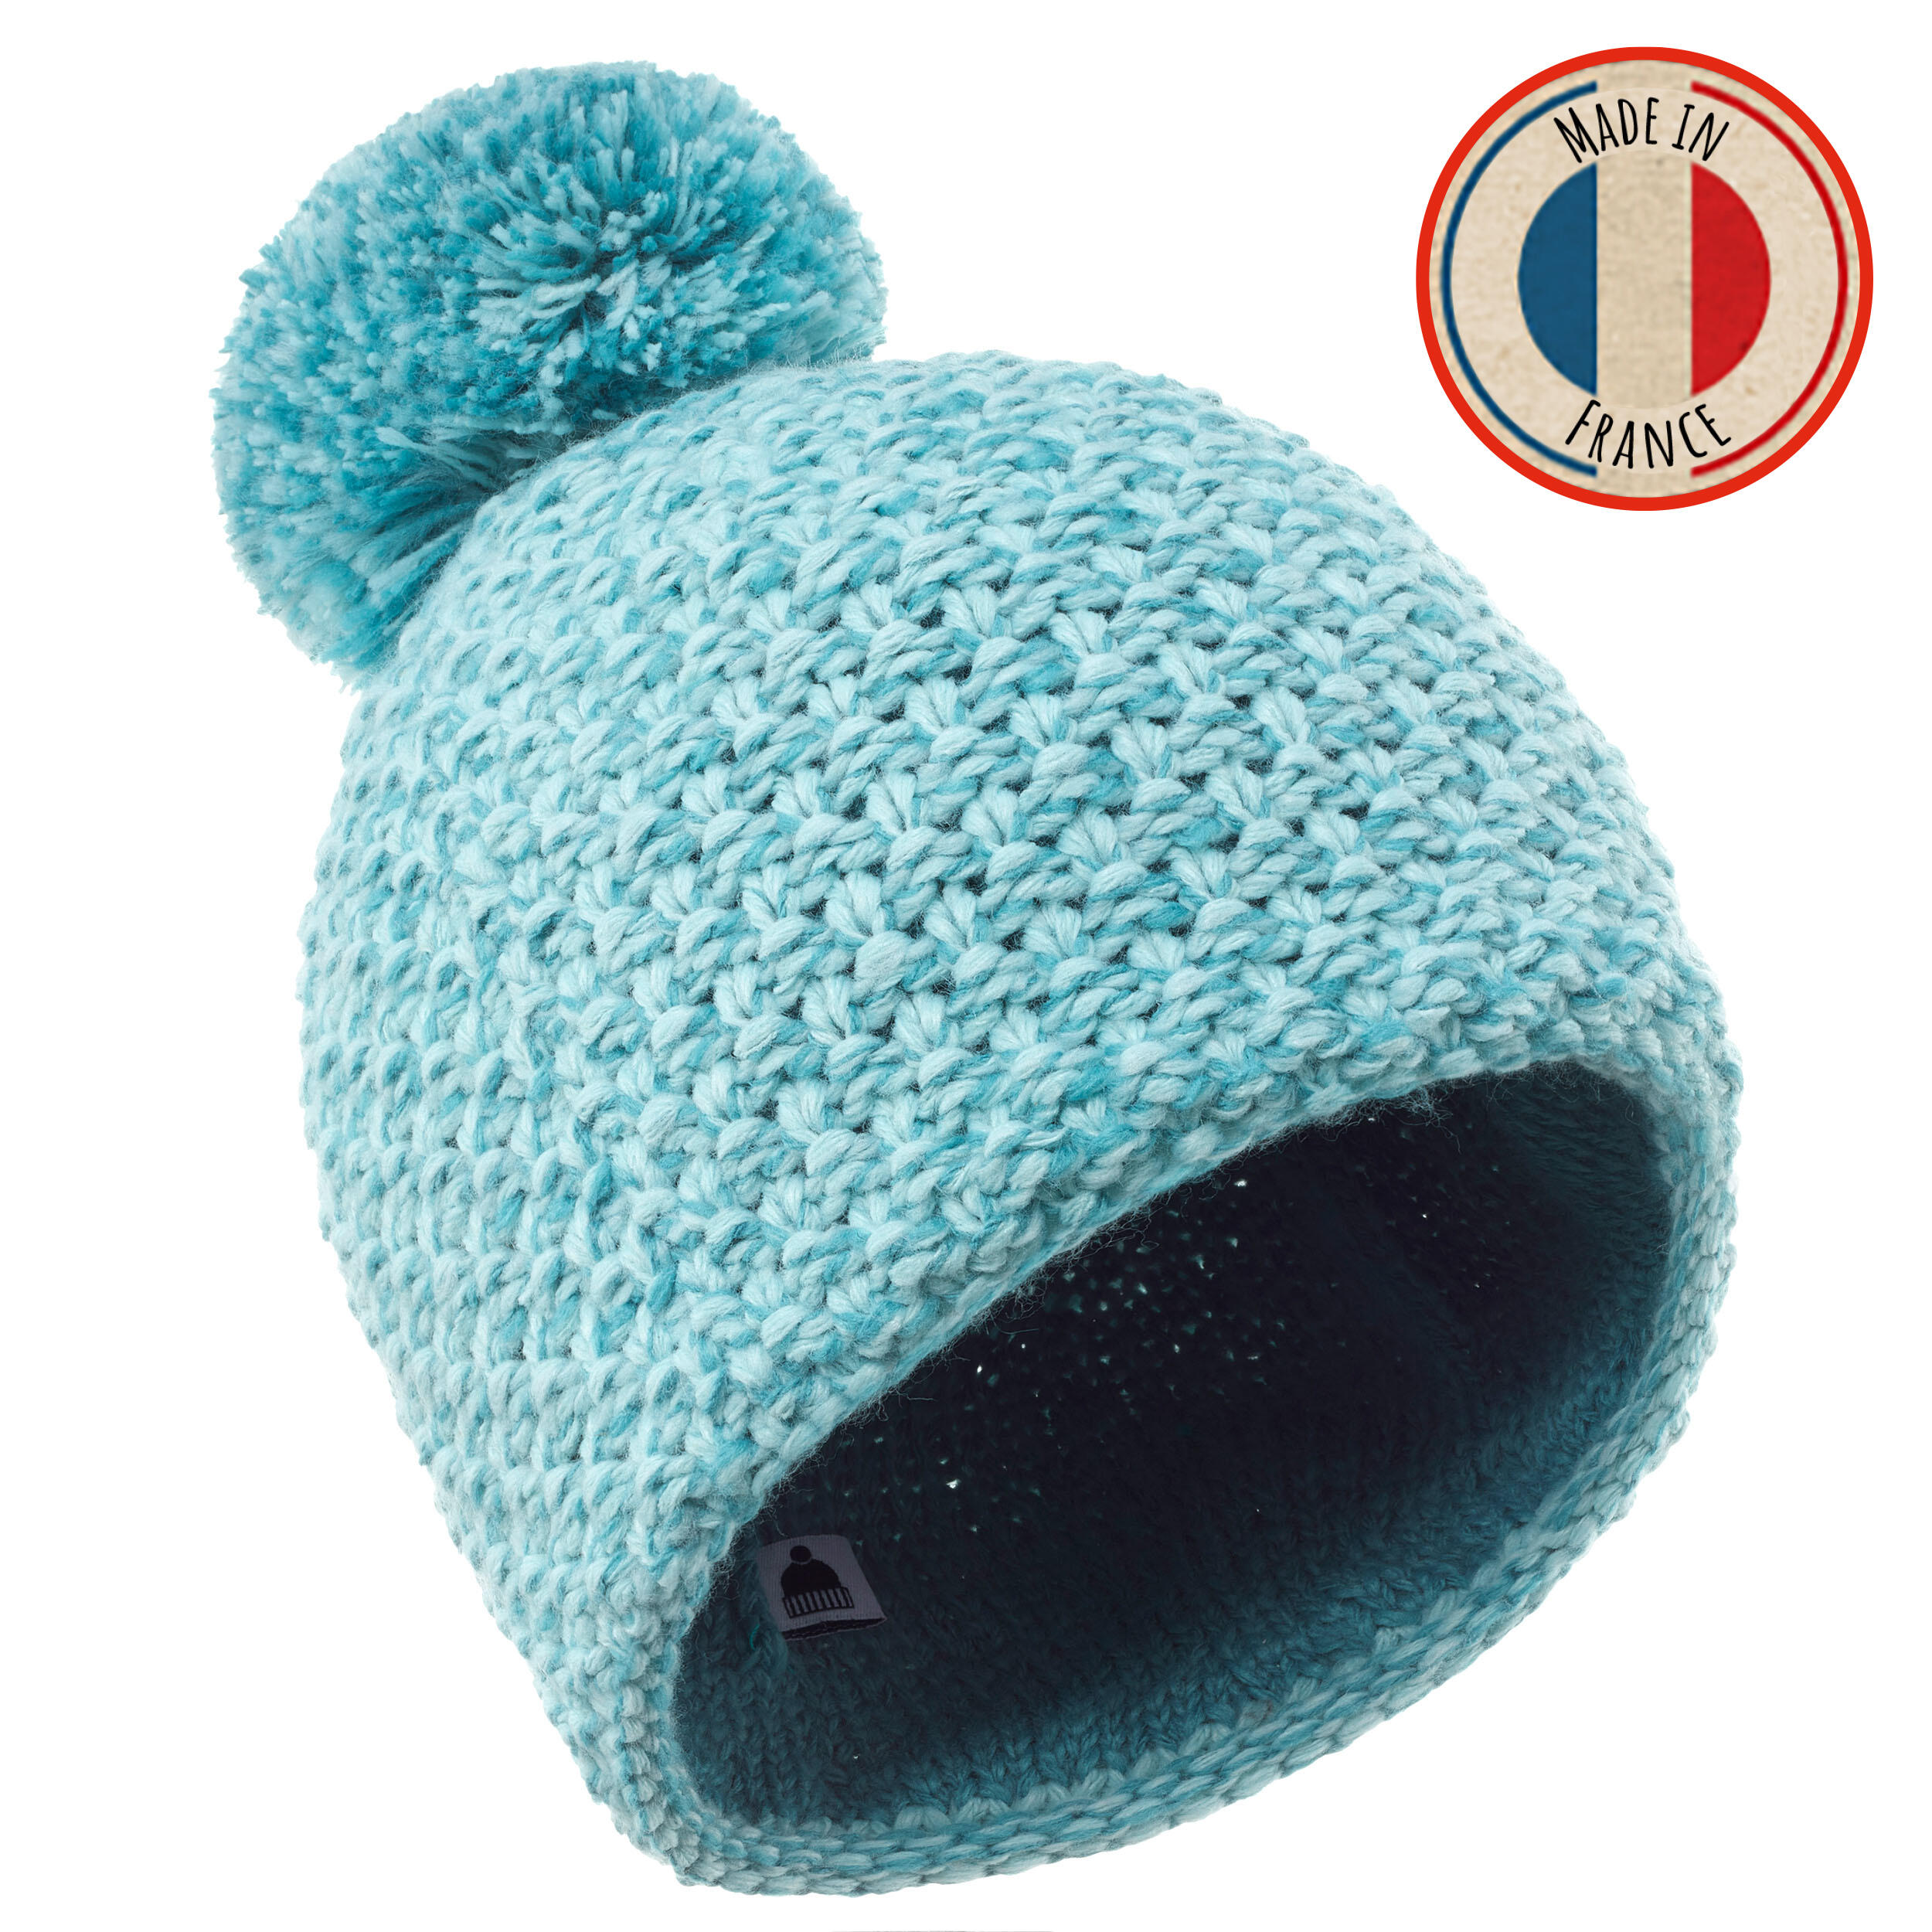 WEDZE KIDS’ SKI HAT - MADE IN FRANCE - TIMELESS - TURQUOISE